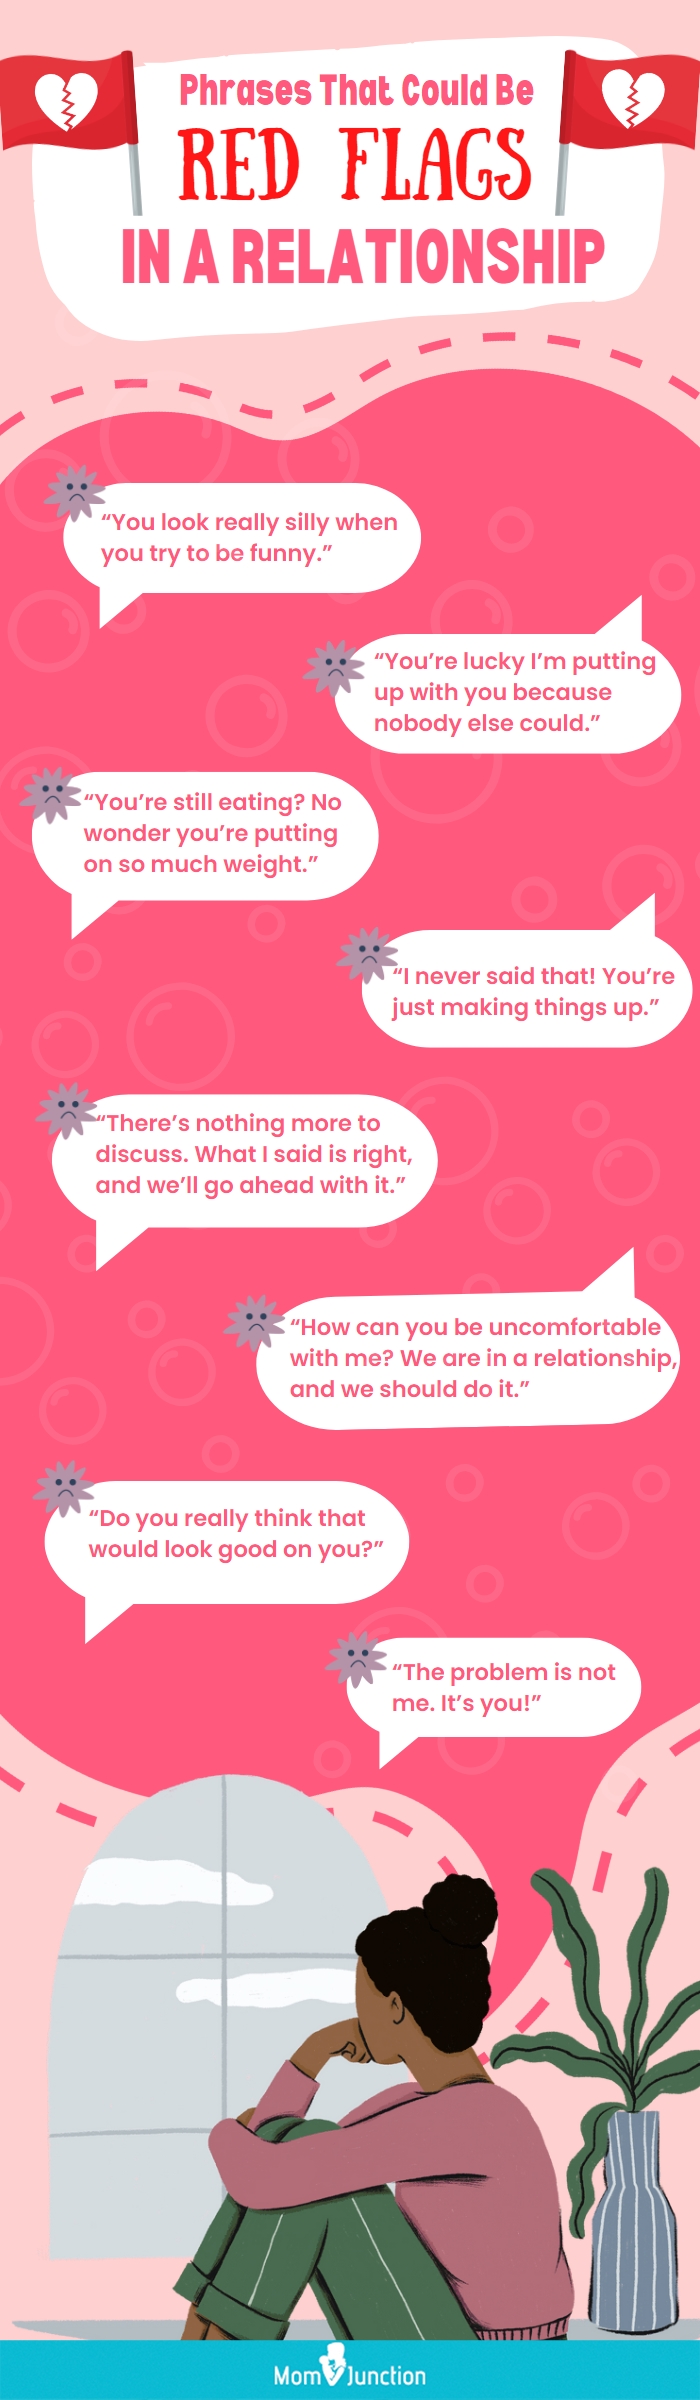 phrases that could be red flags in a relationship [infographic]